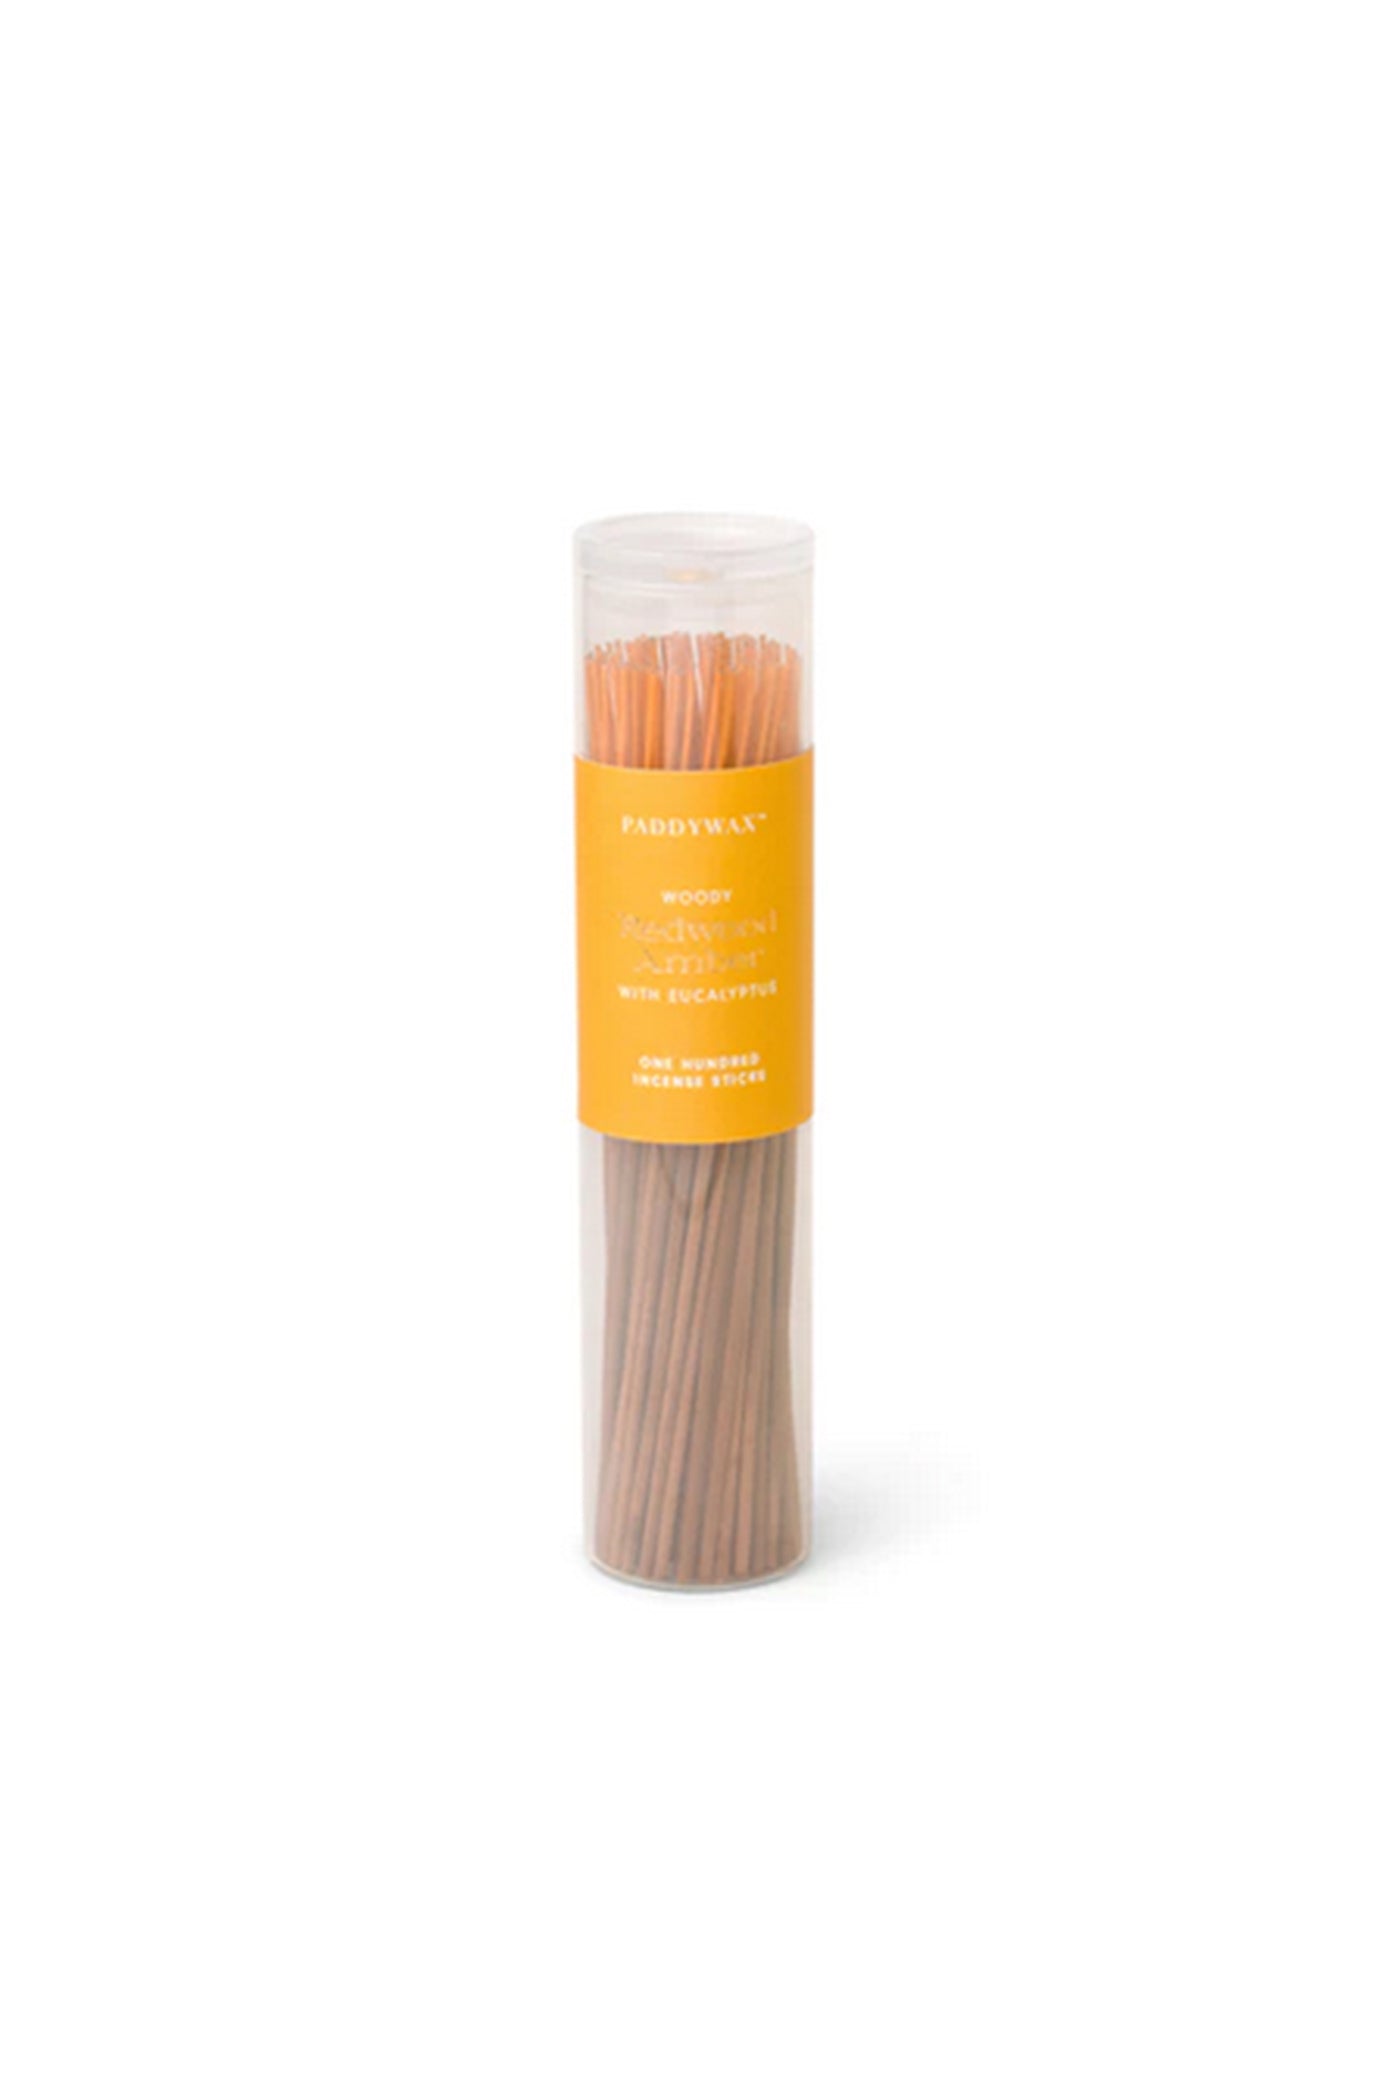 Incense Sticks - Redwood Amber by Paddywax